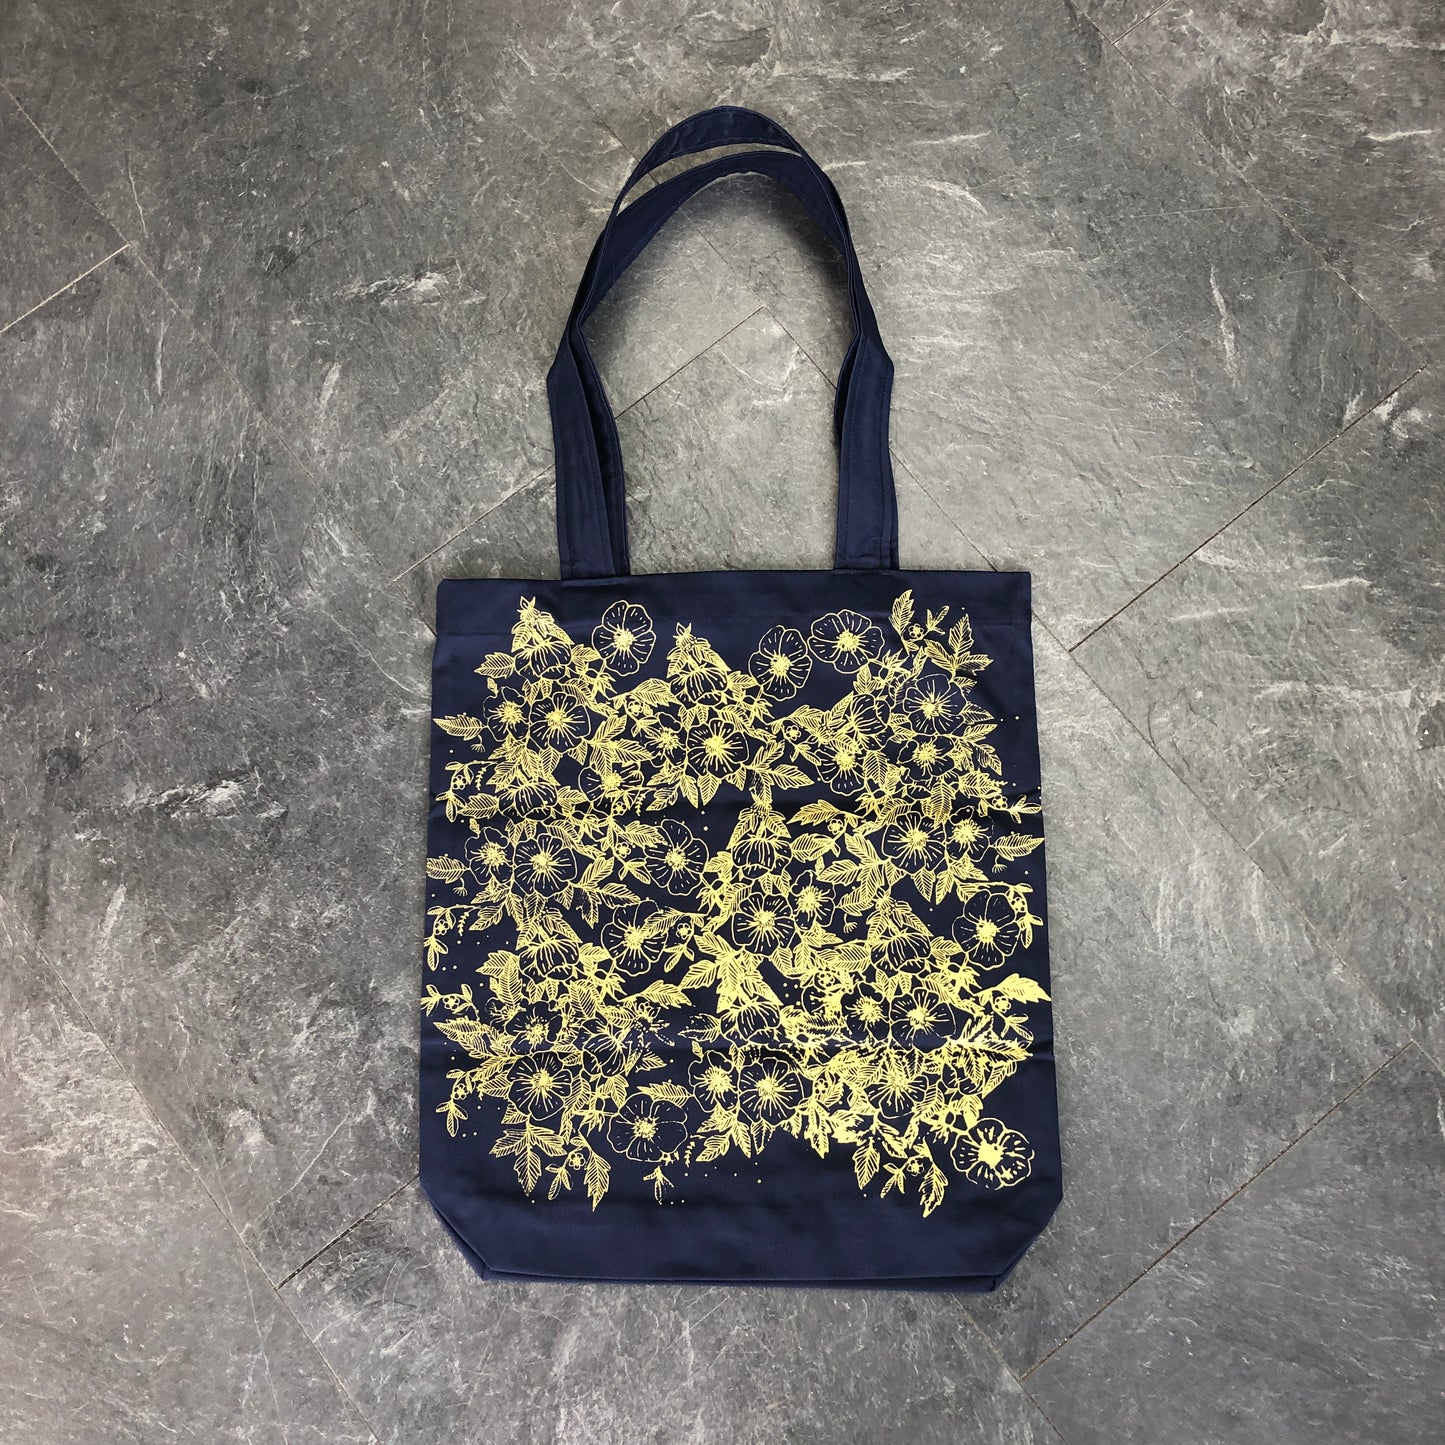 Golden flower tote bag - The laughing fairy